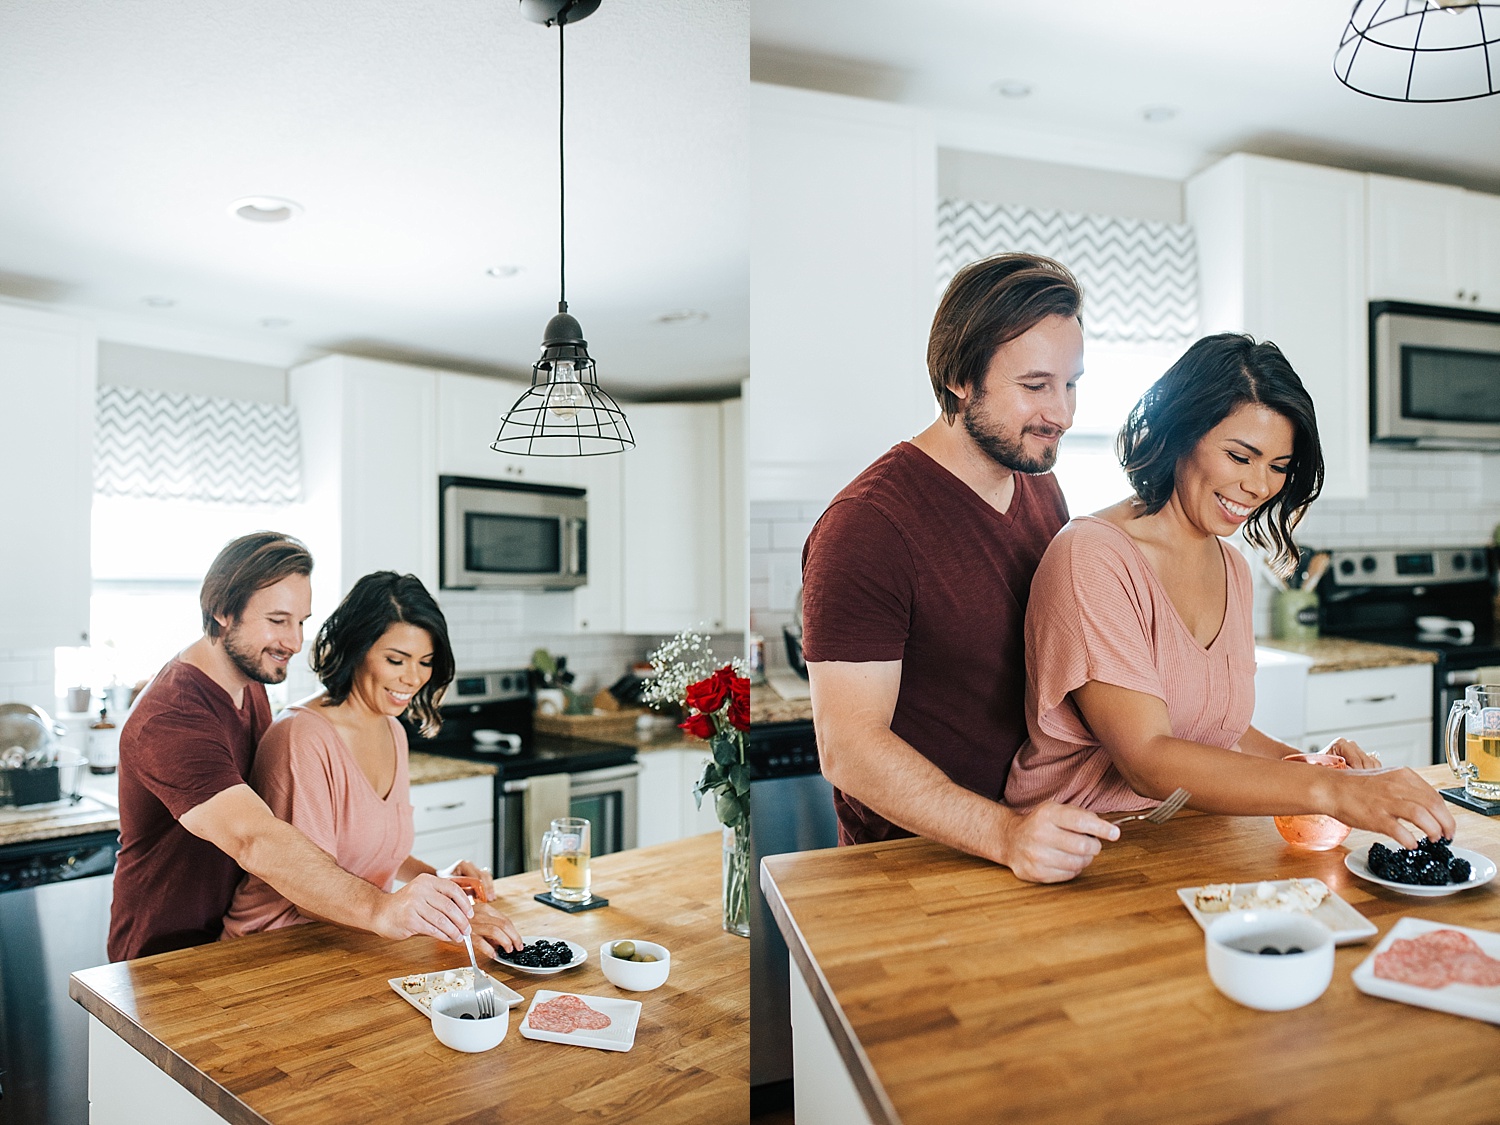 In Home Couples Session, Lifestyle Couples Session, Lifestyle Couples Portraits, Pillow Fight Engagement Photos, In home engagement Session, Ashley Izquierdo, Tampa Wedding Photographers, Tampa Engagement Photos, Tampa Engagement Photographers, Engagement Session Ideas